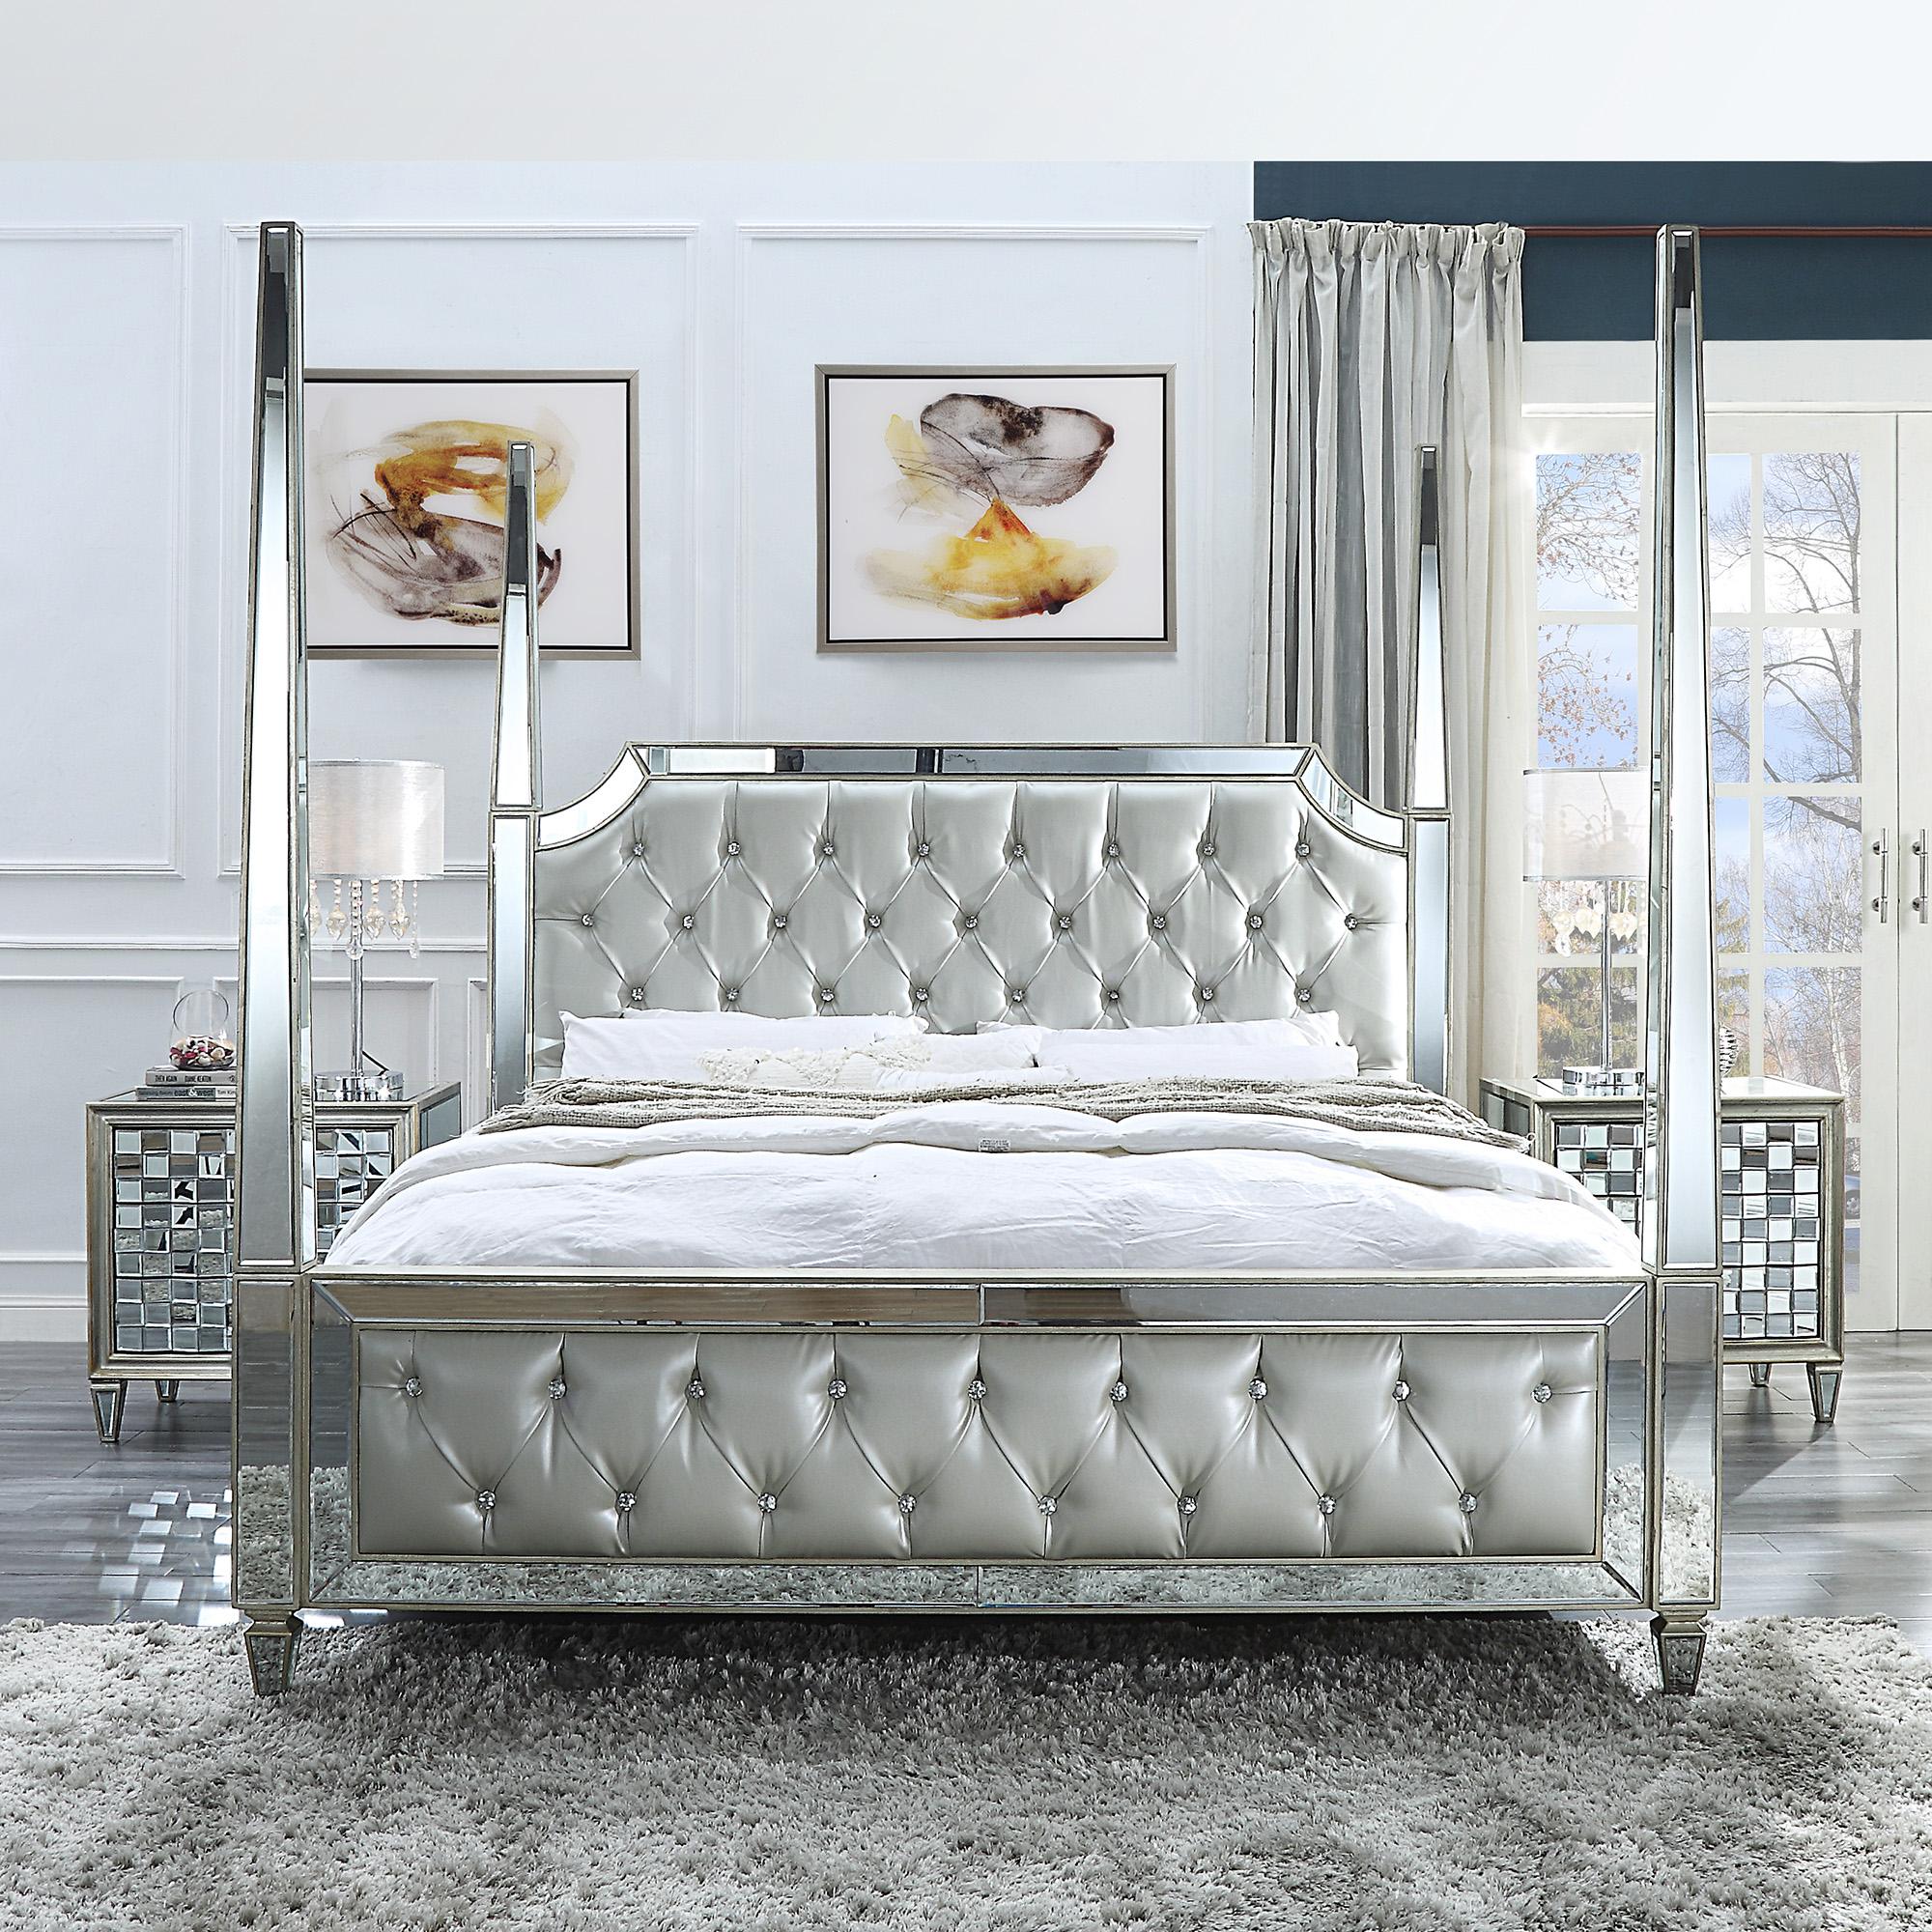 Modern Canopy Bedroom Set HD-6001 HD-CK6001-3PC in Mirrored, Silver Faux Leather